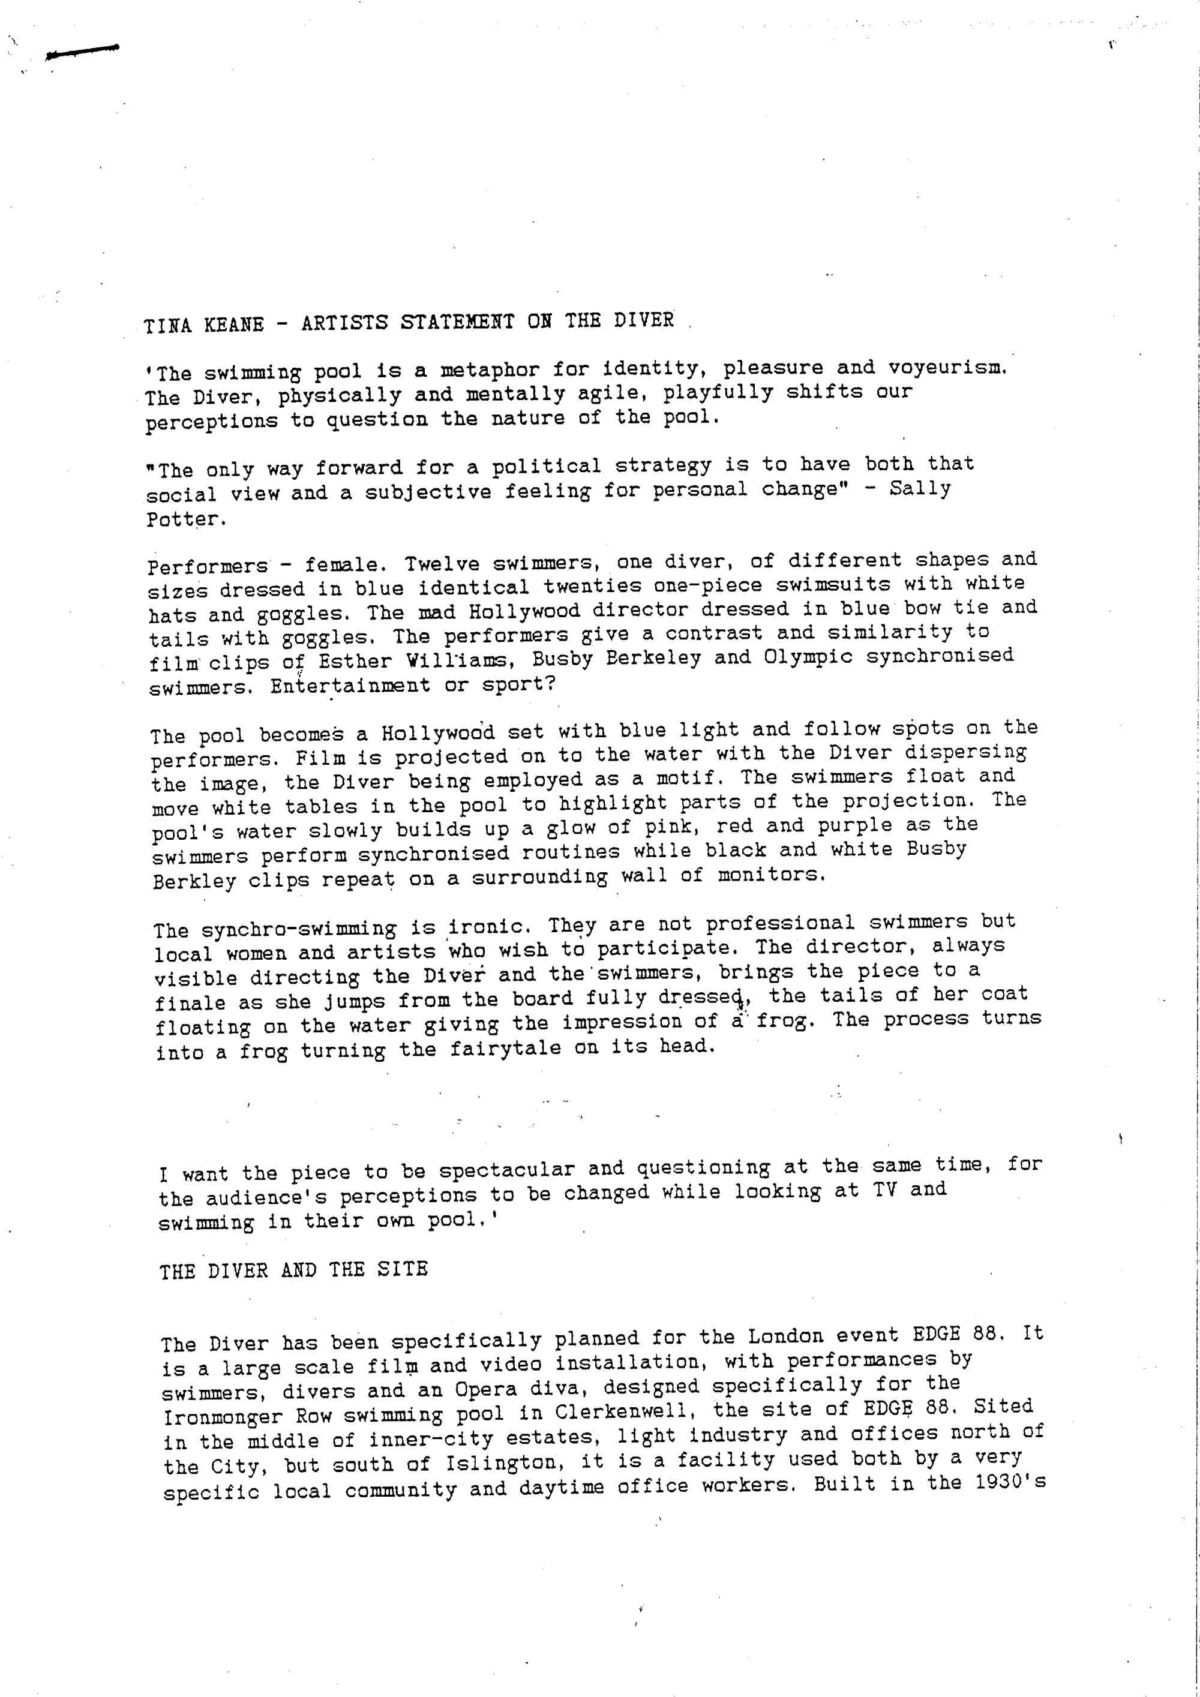 Tina Keane, Artists Statement 'The Diver', 1988 (Page 1 of 2)